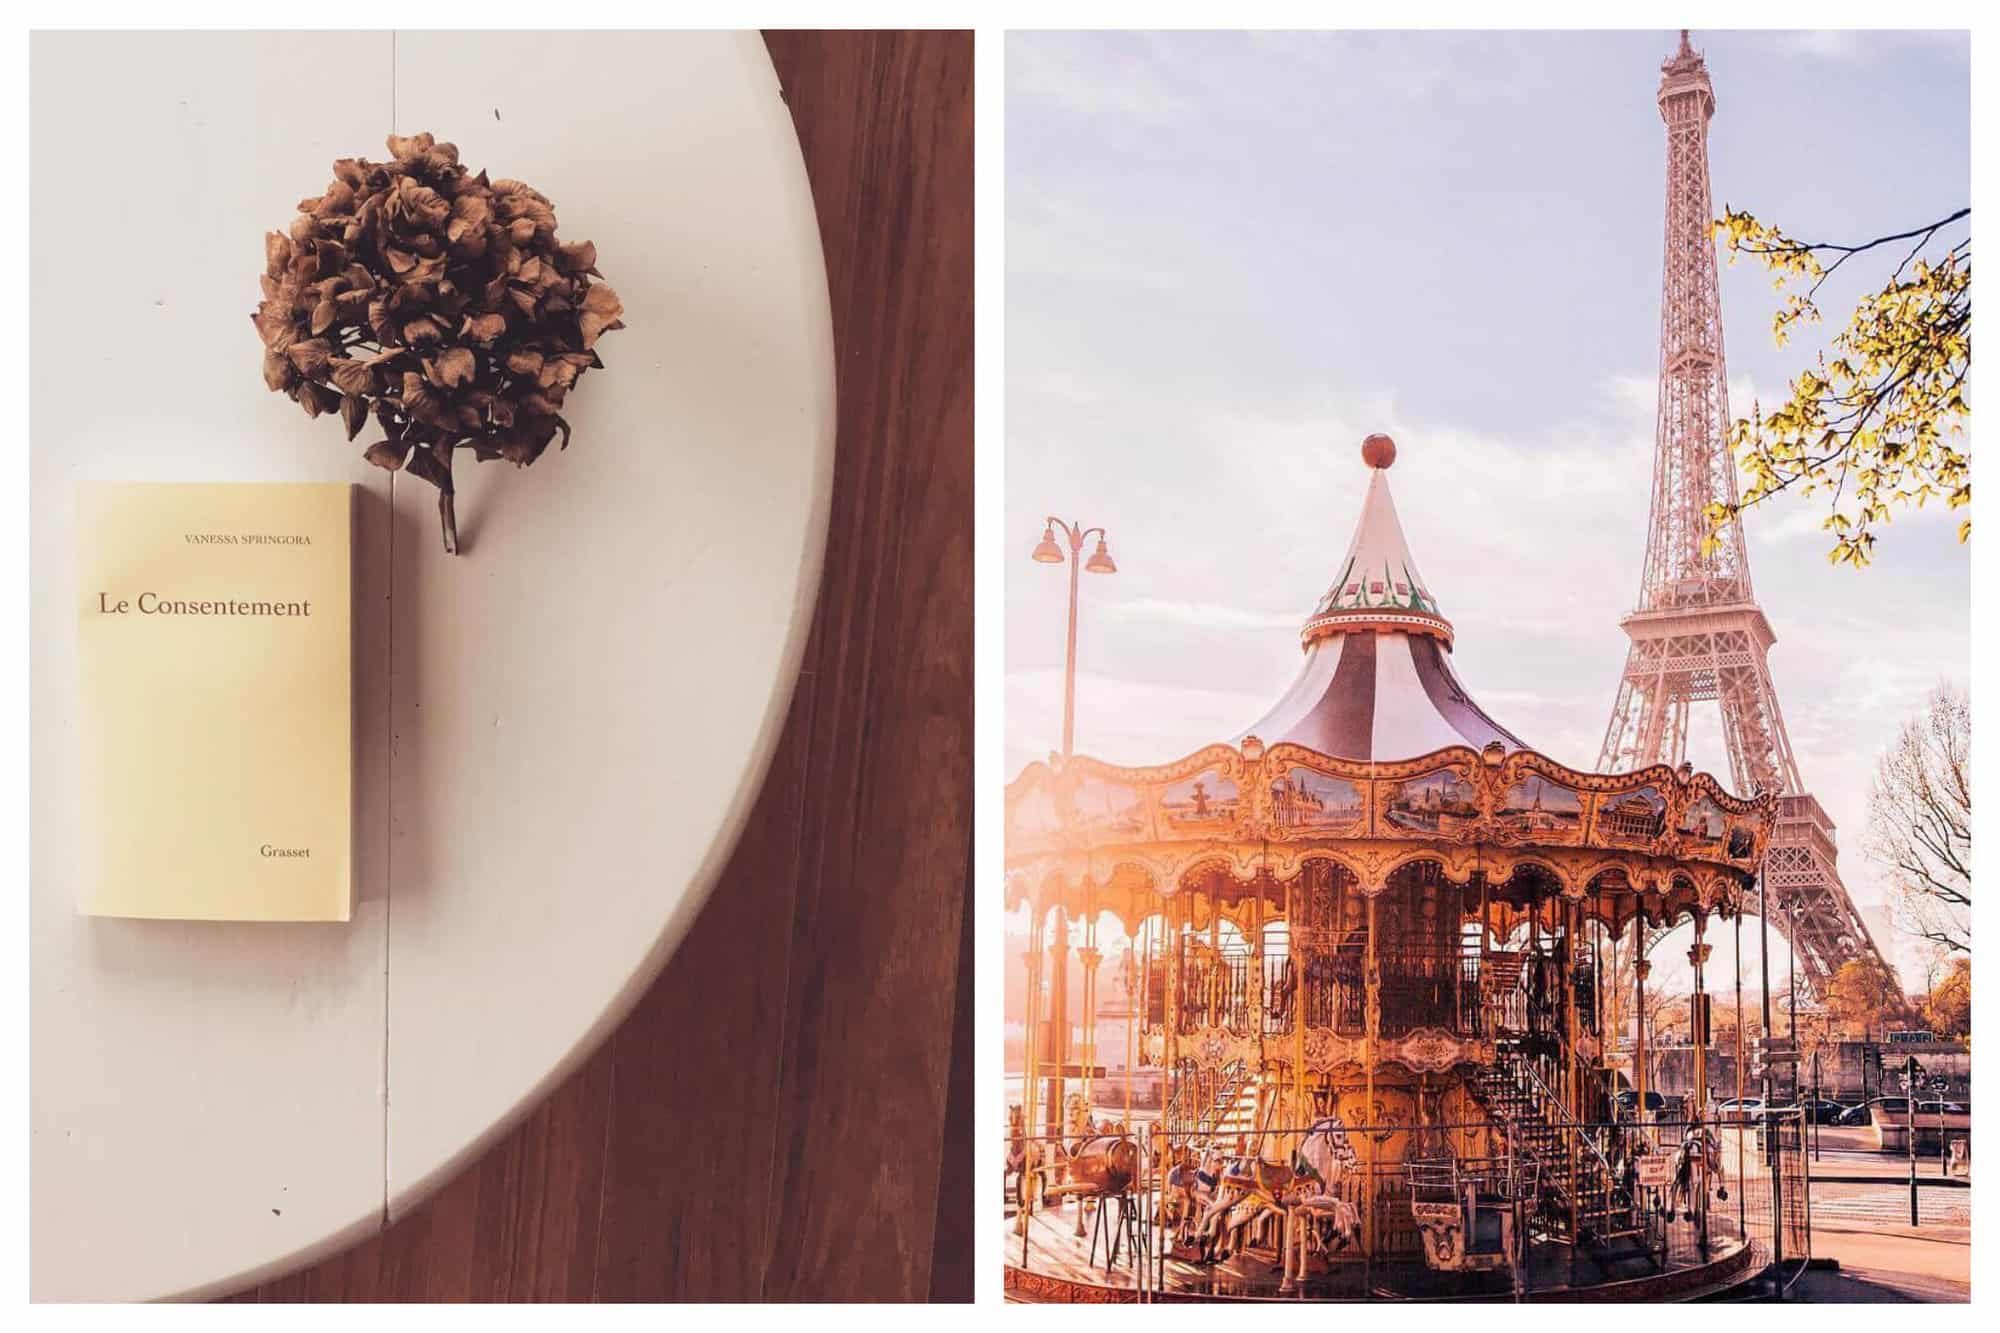 Left: A book called "Le Consentement" by french author Vanessa Springora lies on a white table with a dried flower beside it. Right: A picture of a Carousel with the Eiffel Tower in the background. Both pictures appear scenic and cosy.